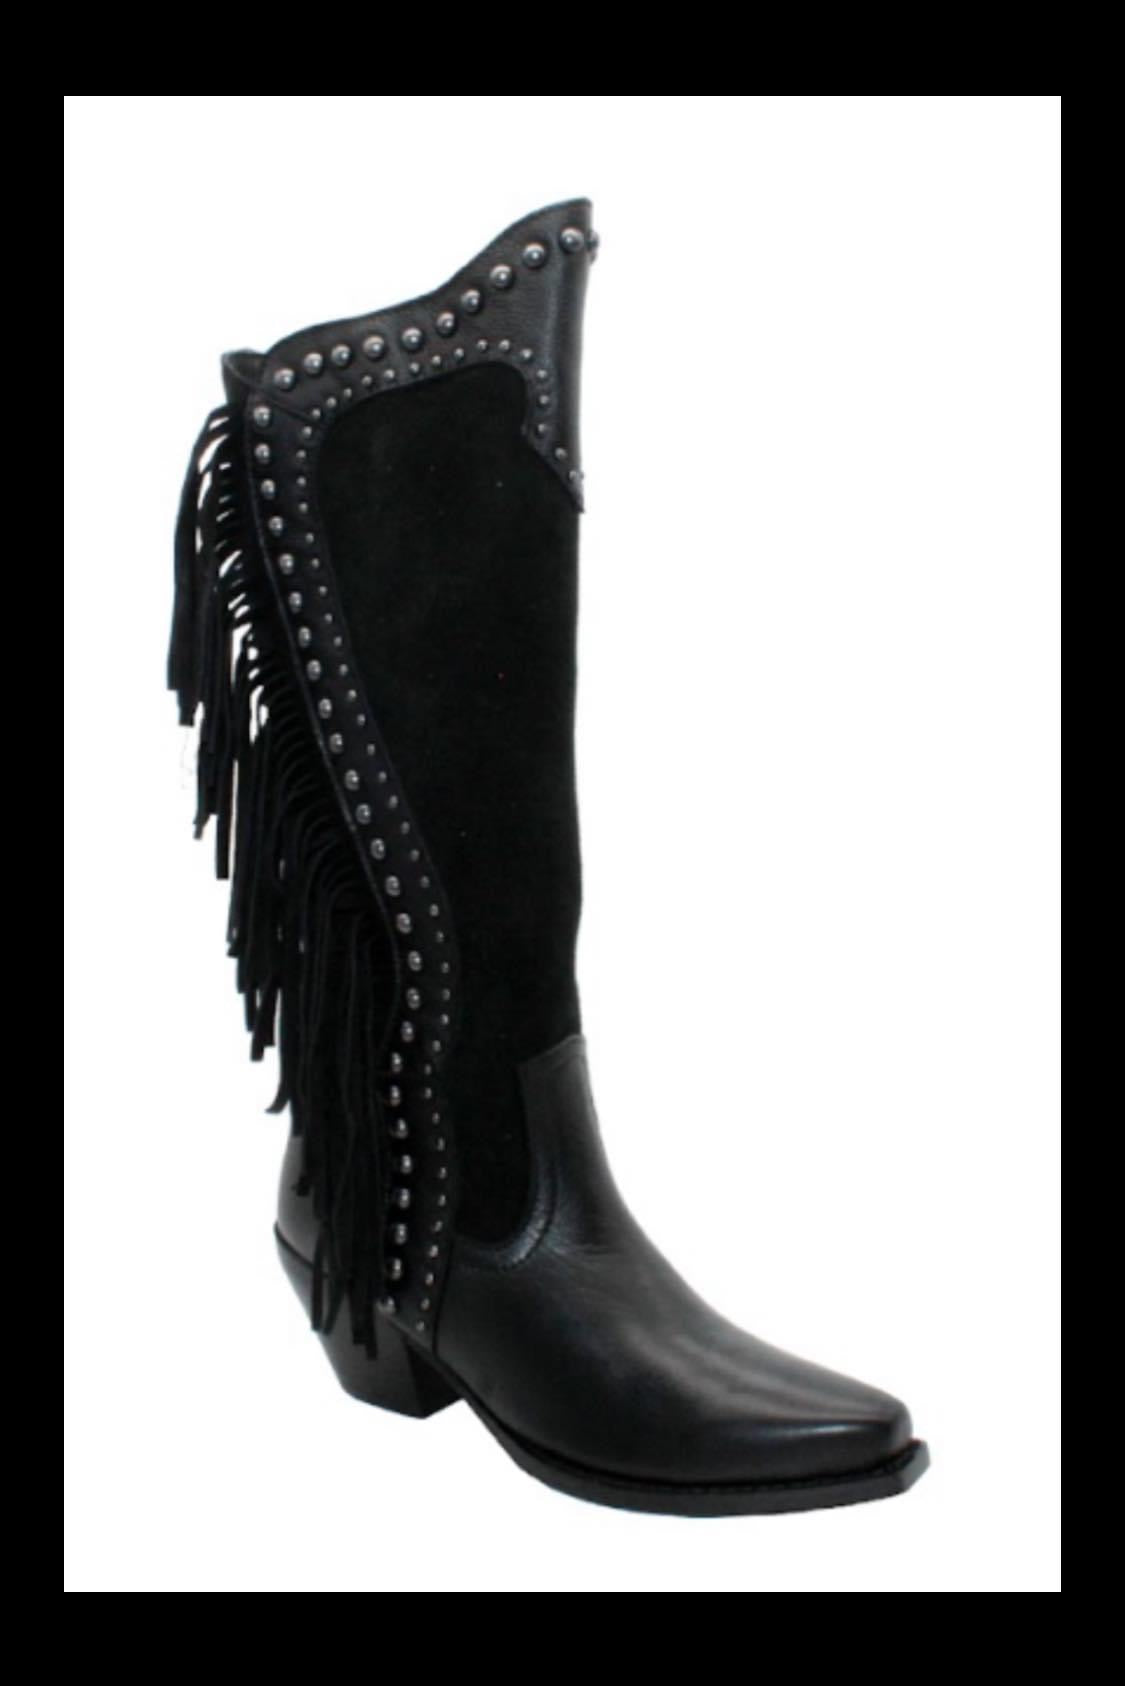 Western black boots